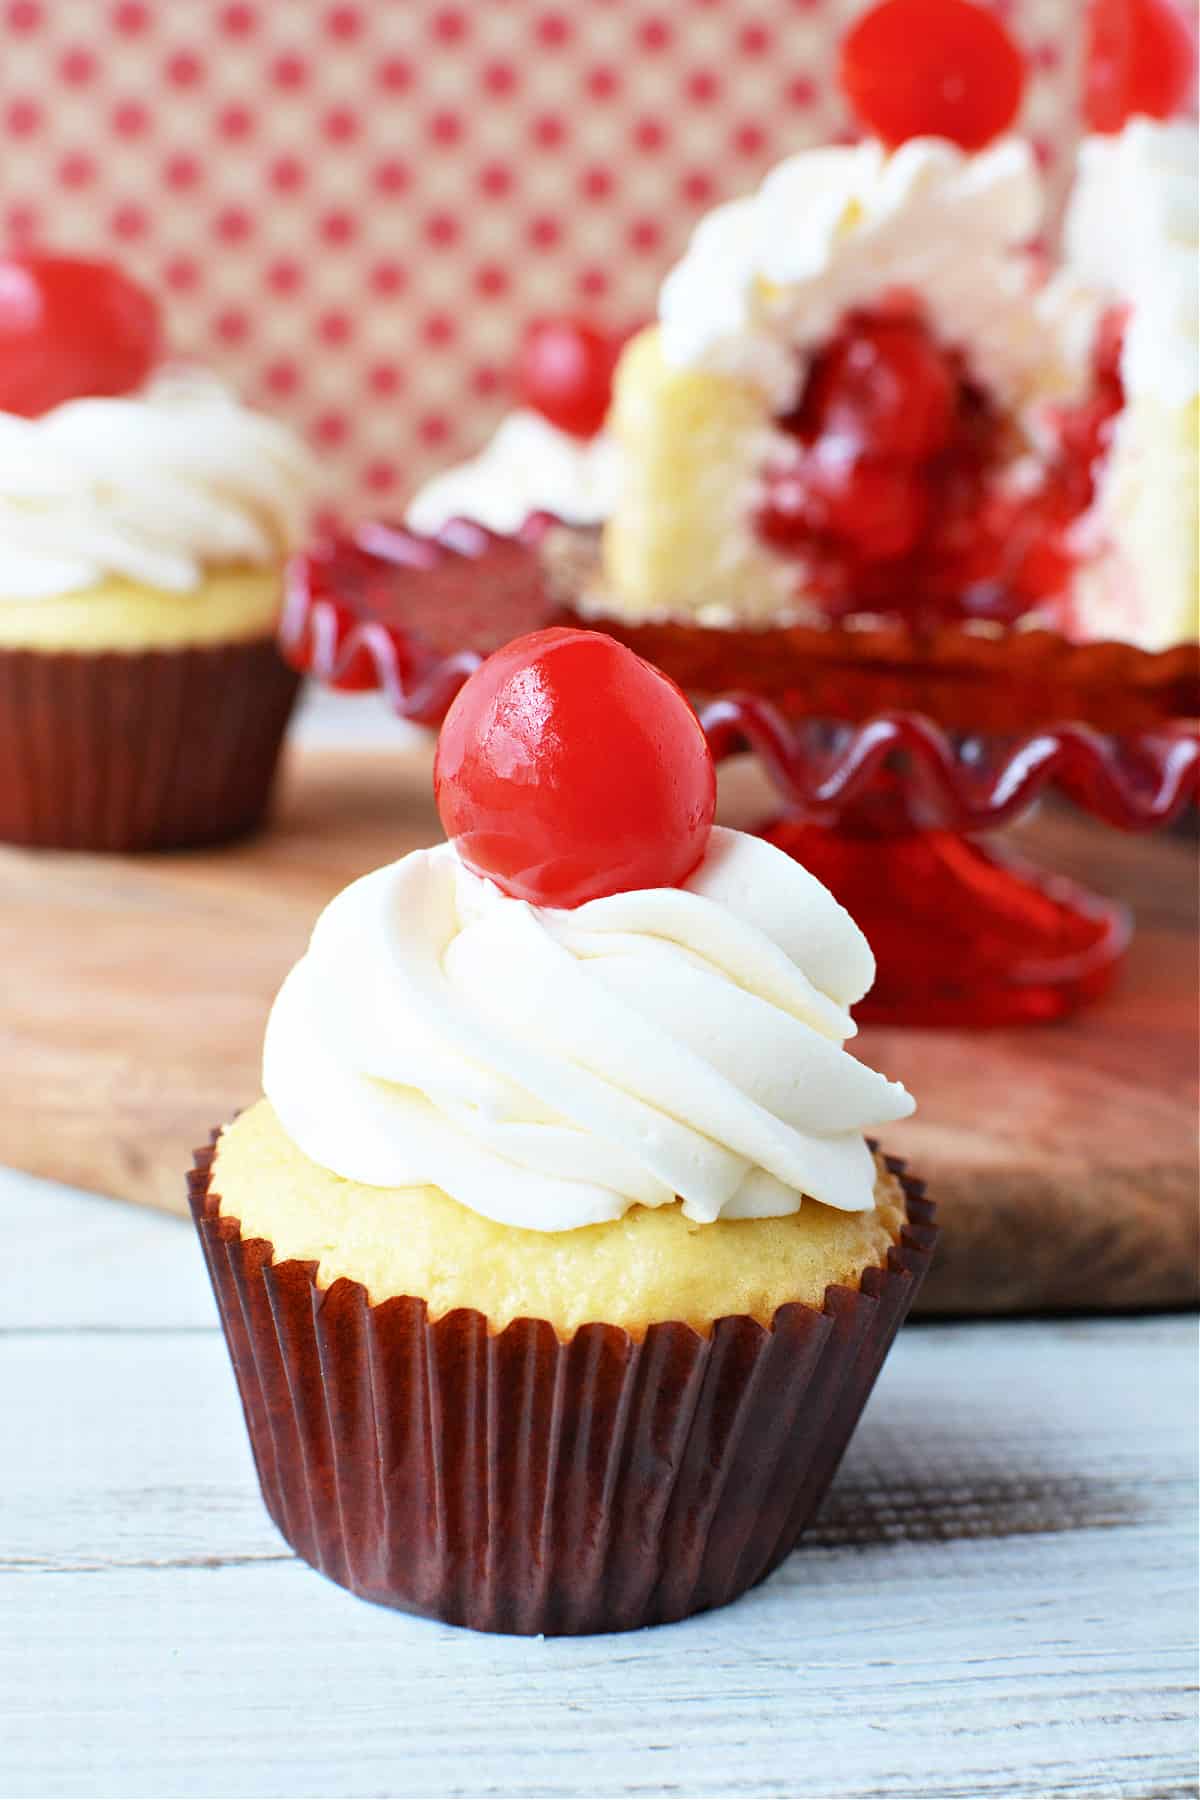 Cherry Filled Cupcakes on a plate with homemade vanilla buttercream frosting and topped with a single maraschino cherry